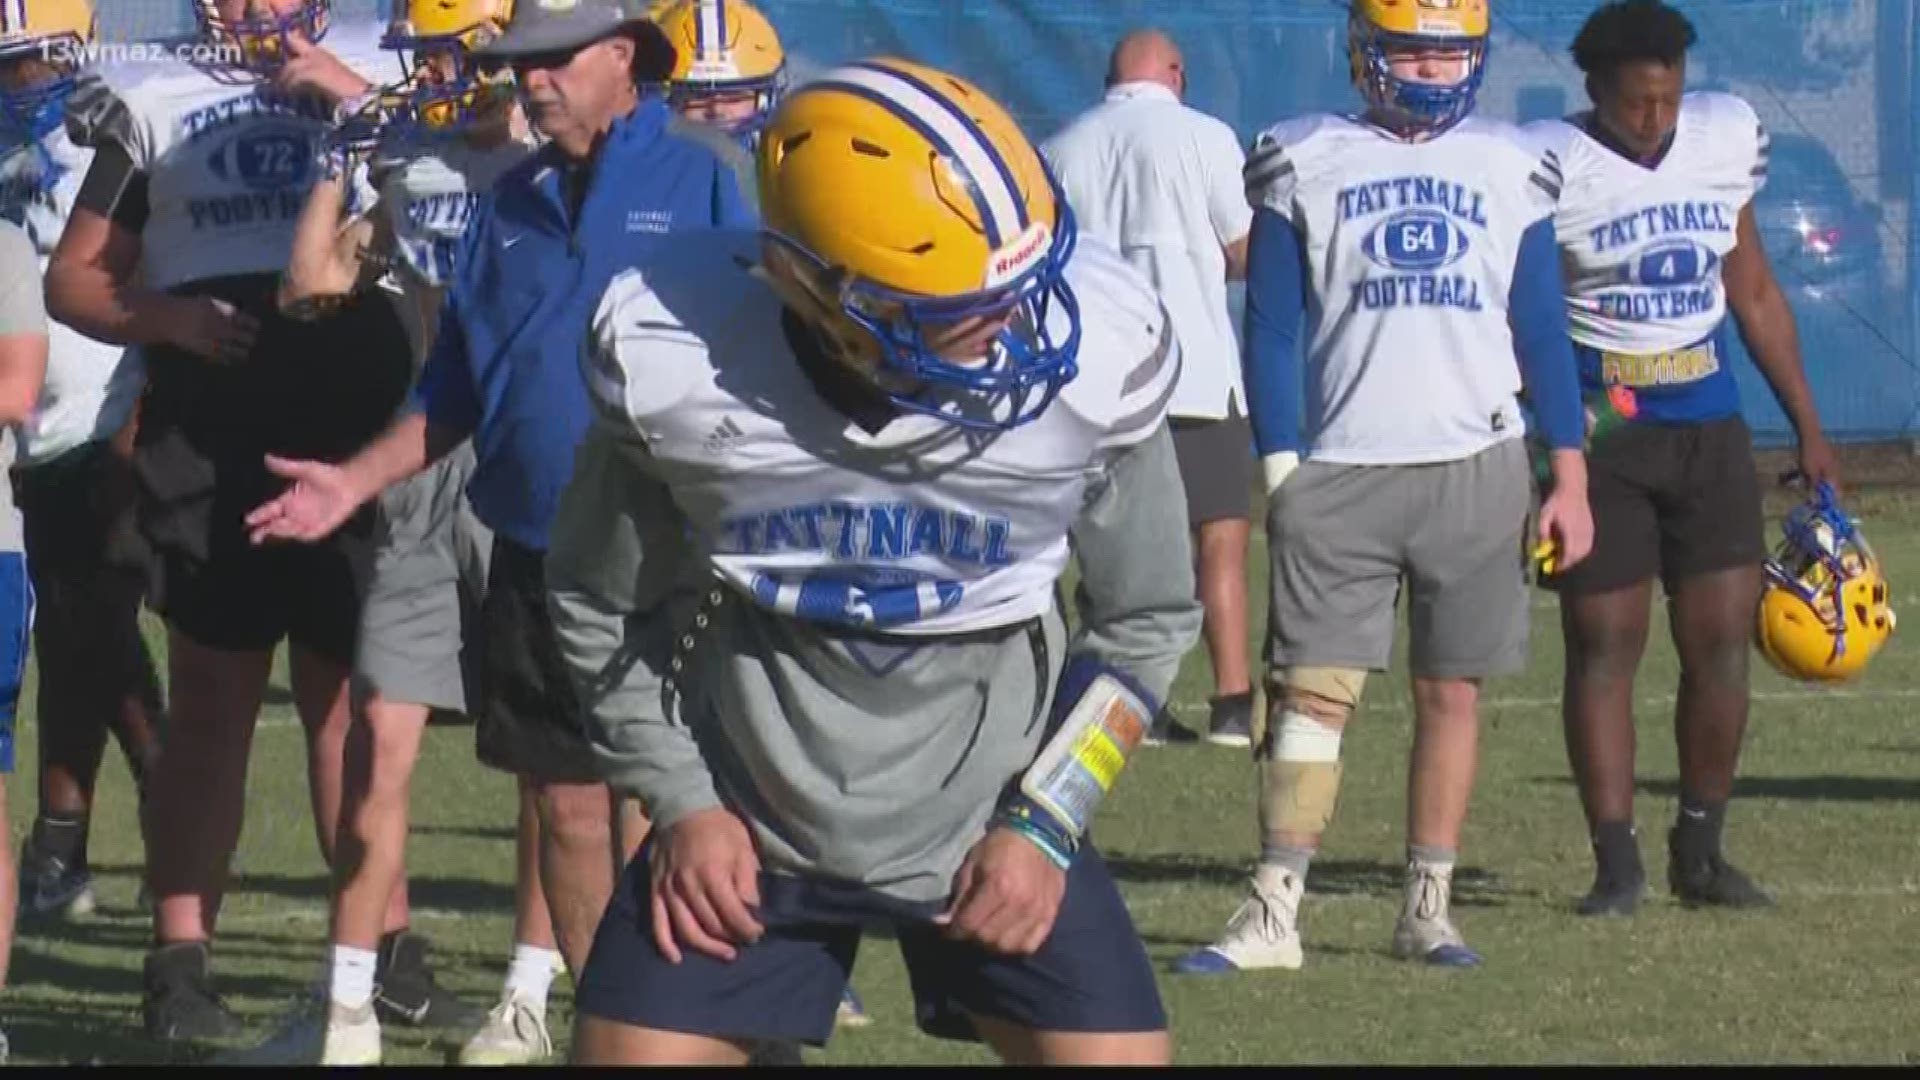 Marvin James introduces us to Tattnall's Wes Allen, our Athlete of the Week.